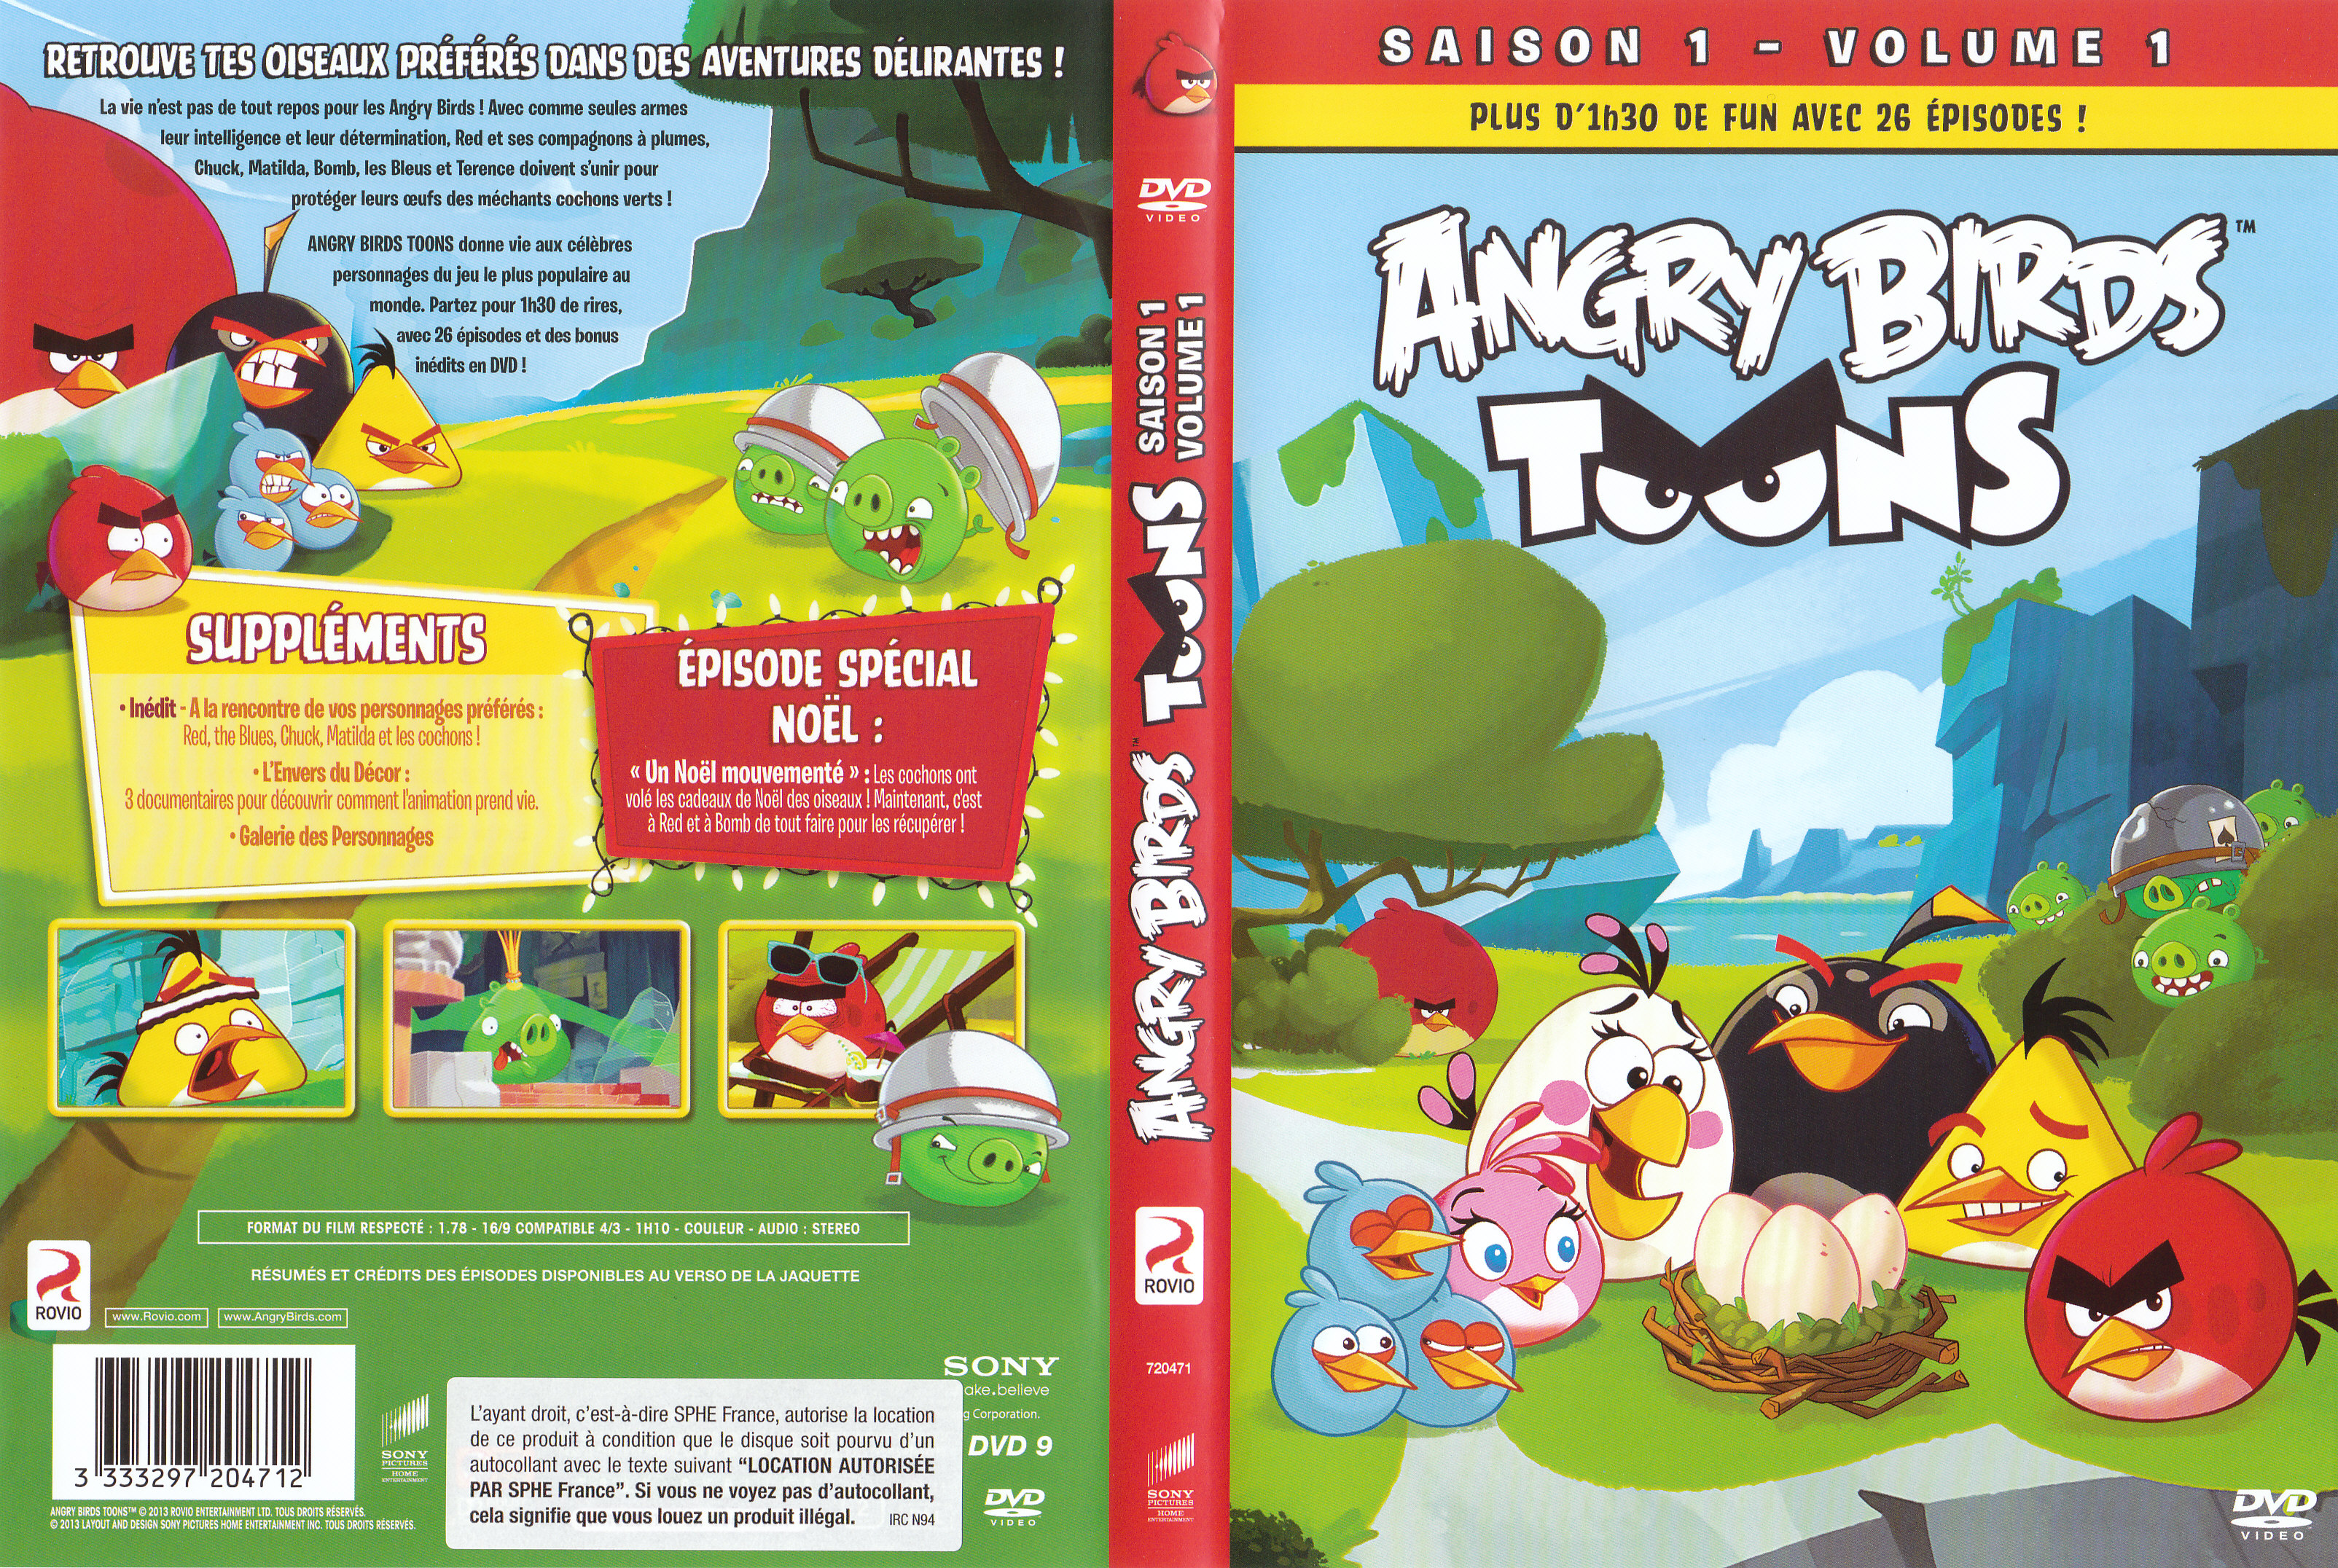 Jaquette DVD Angry birds Toons Saison 1 Vol 01